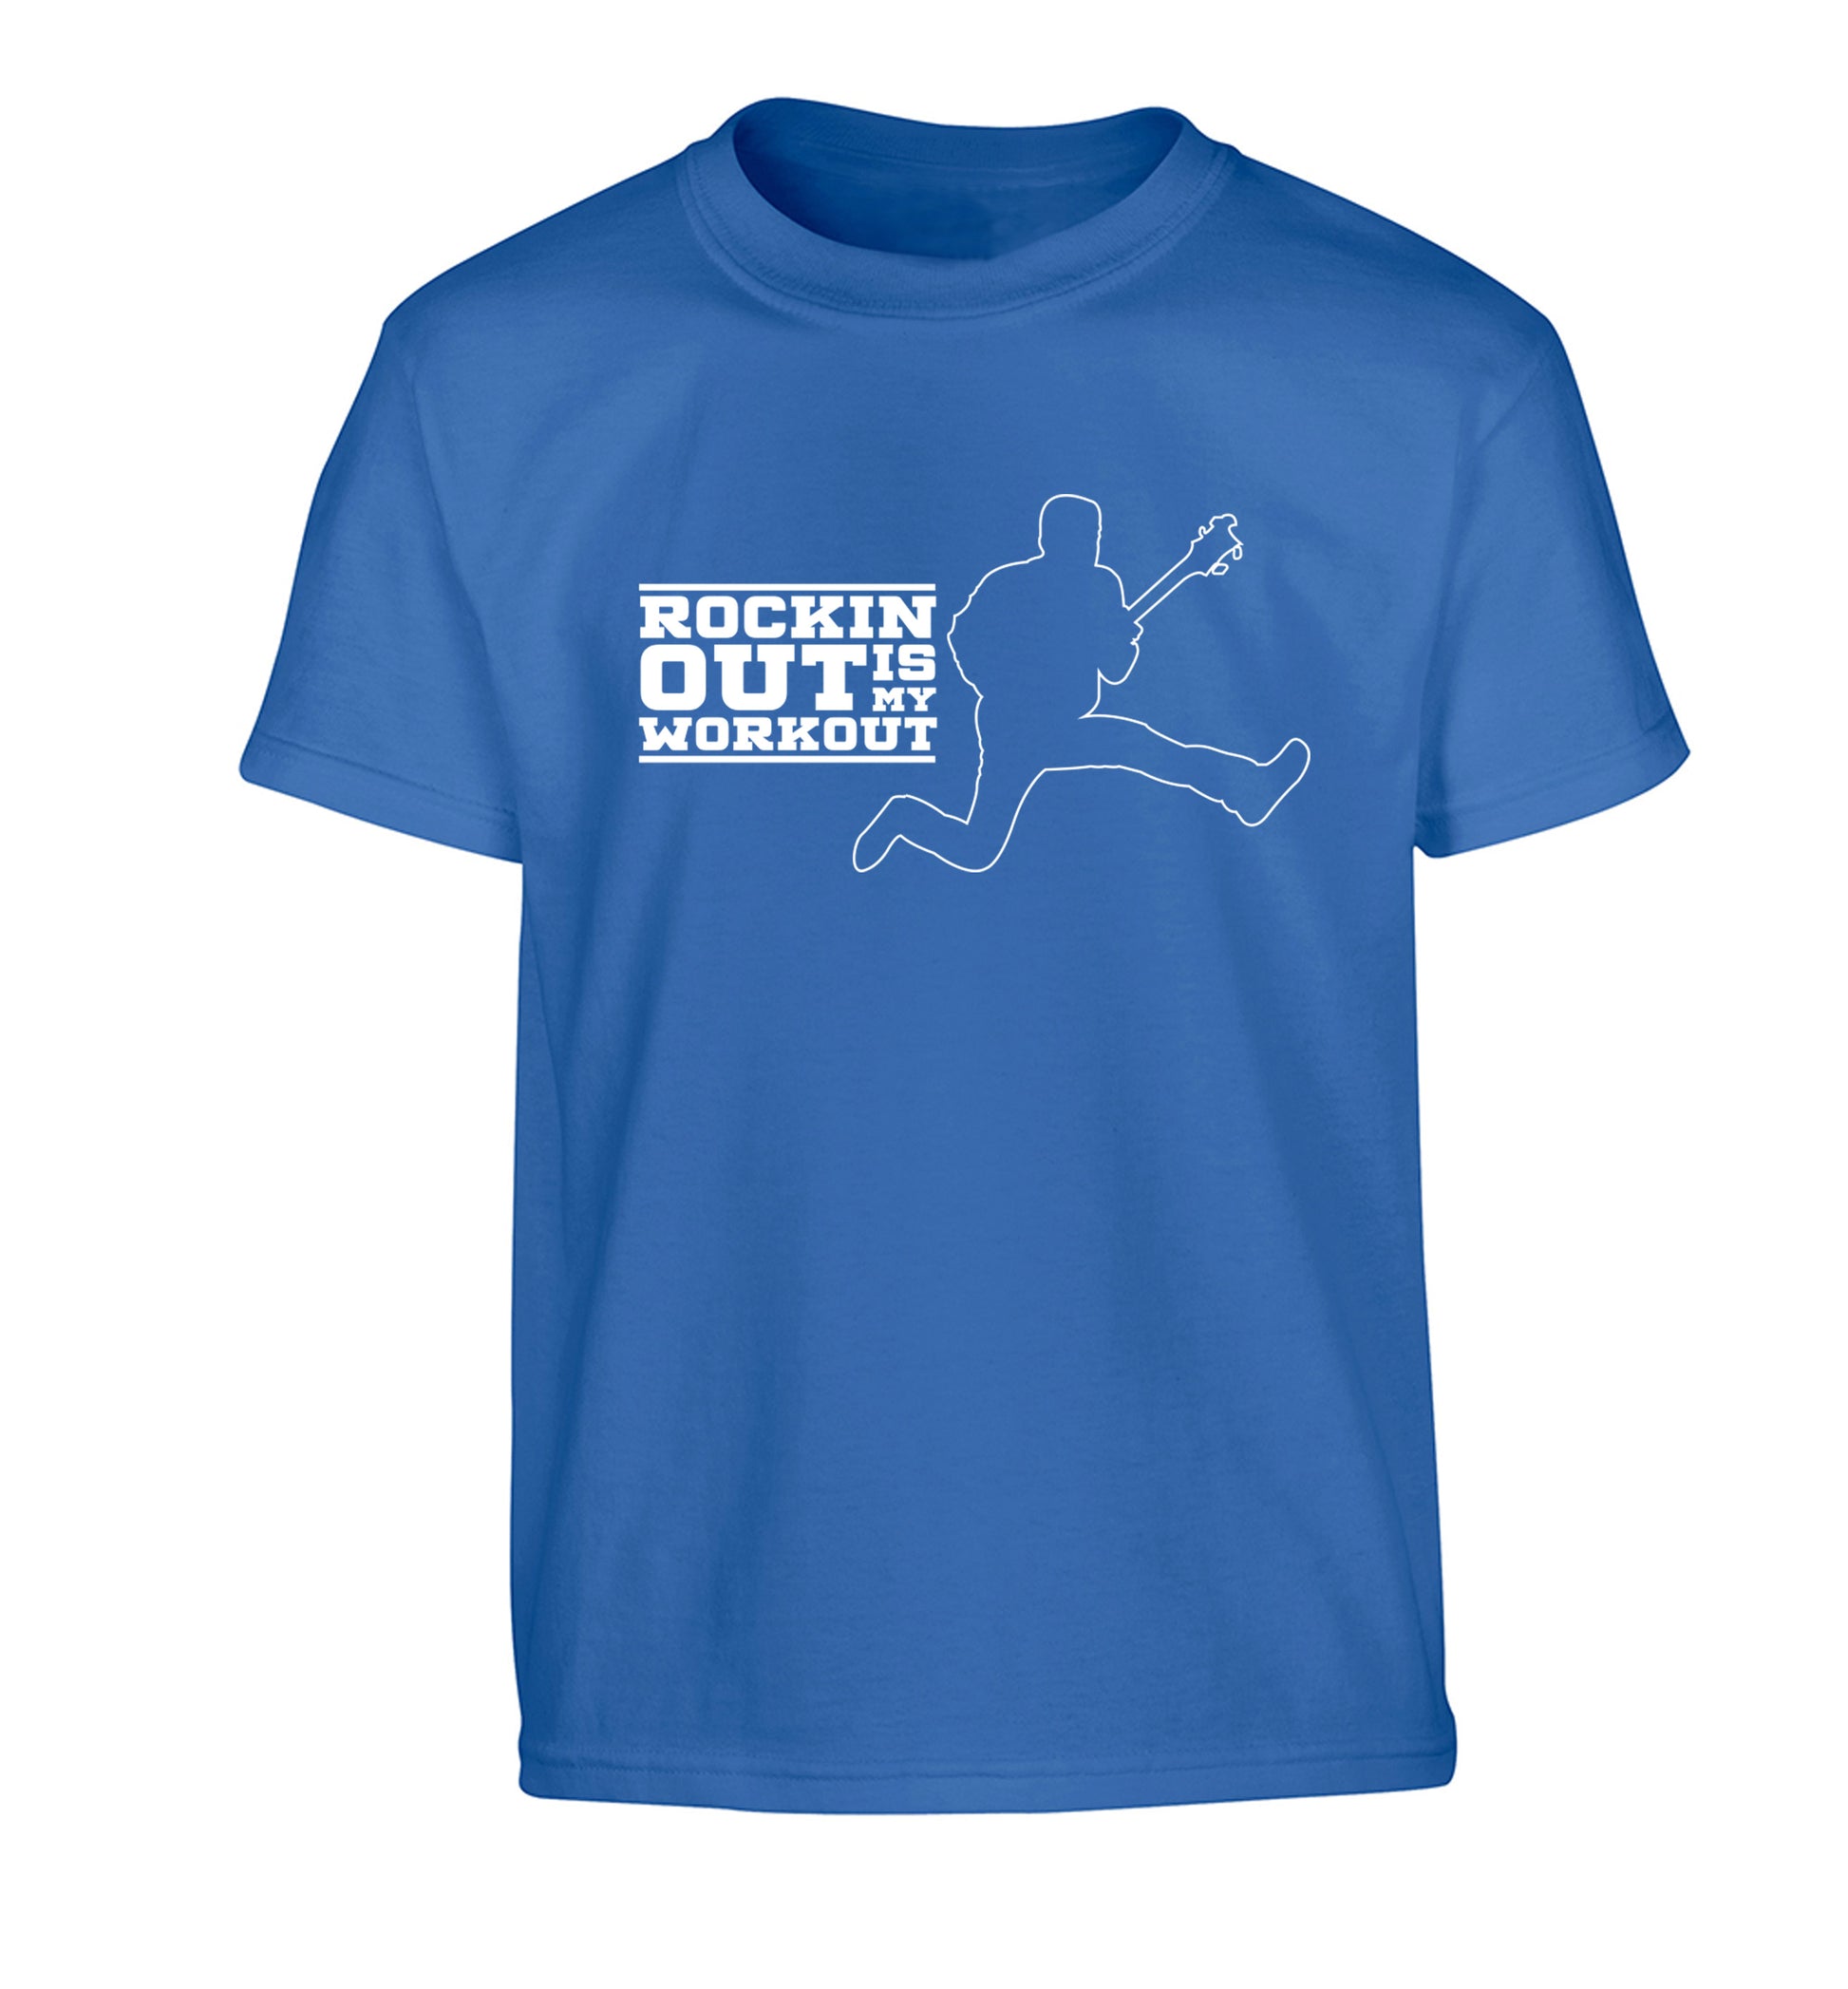 Rockin out is my workout Children's blue Tshirt 12-13 Years